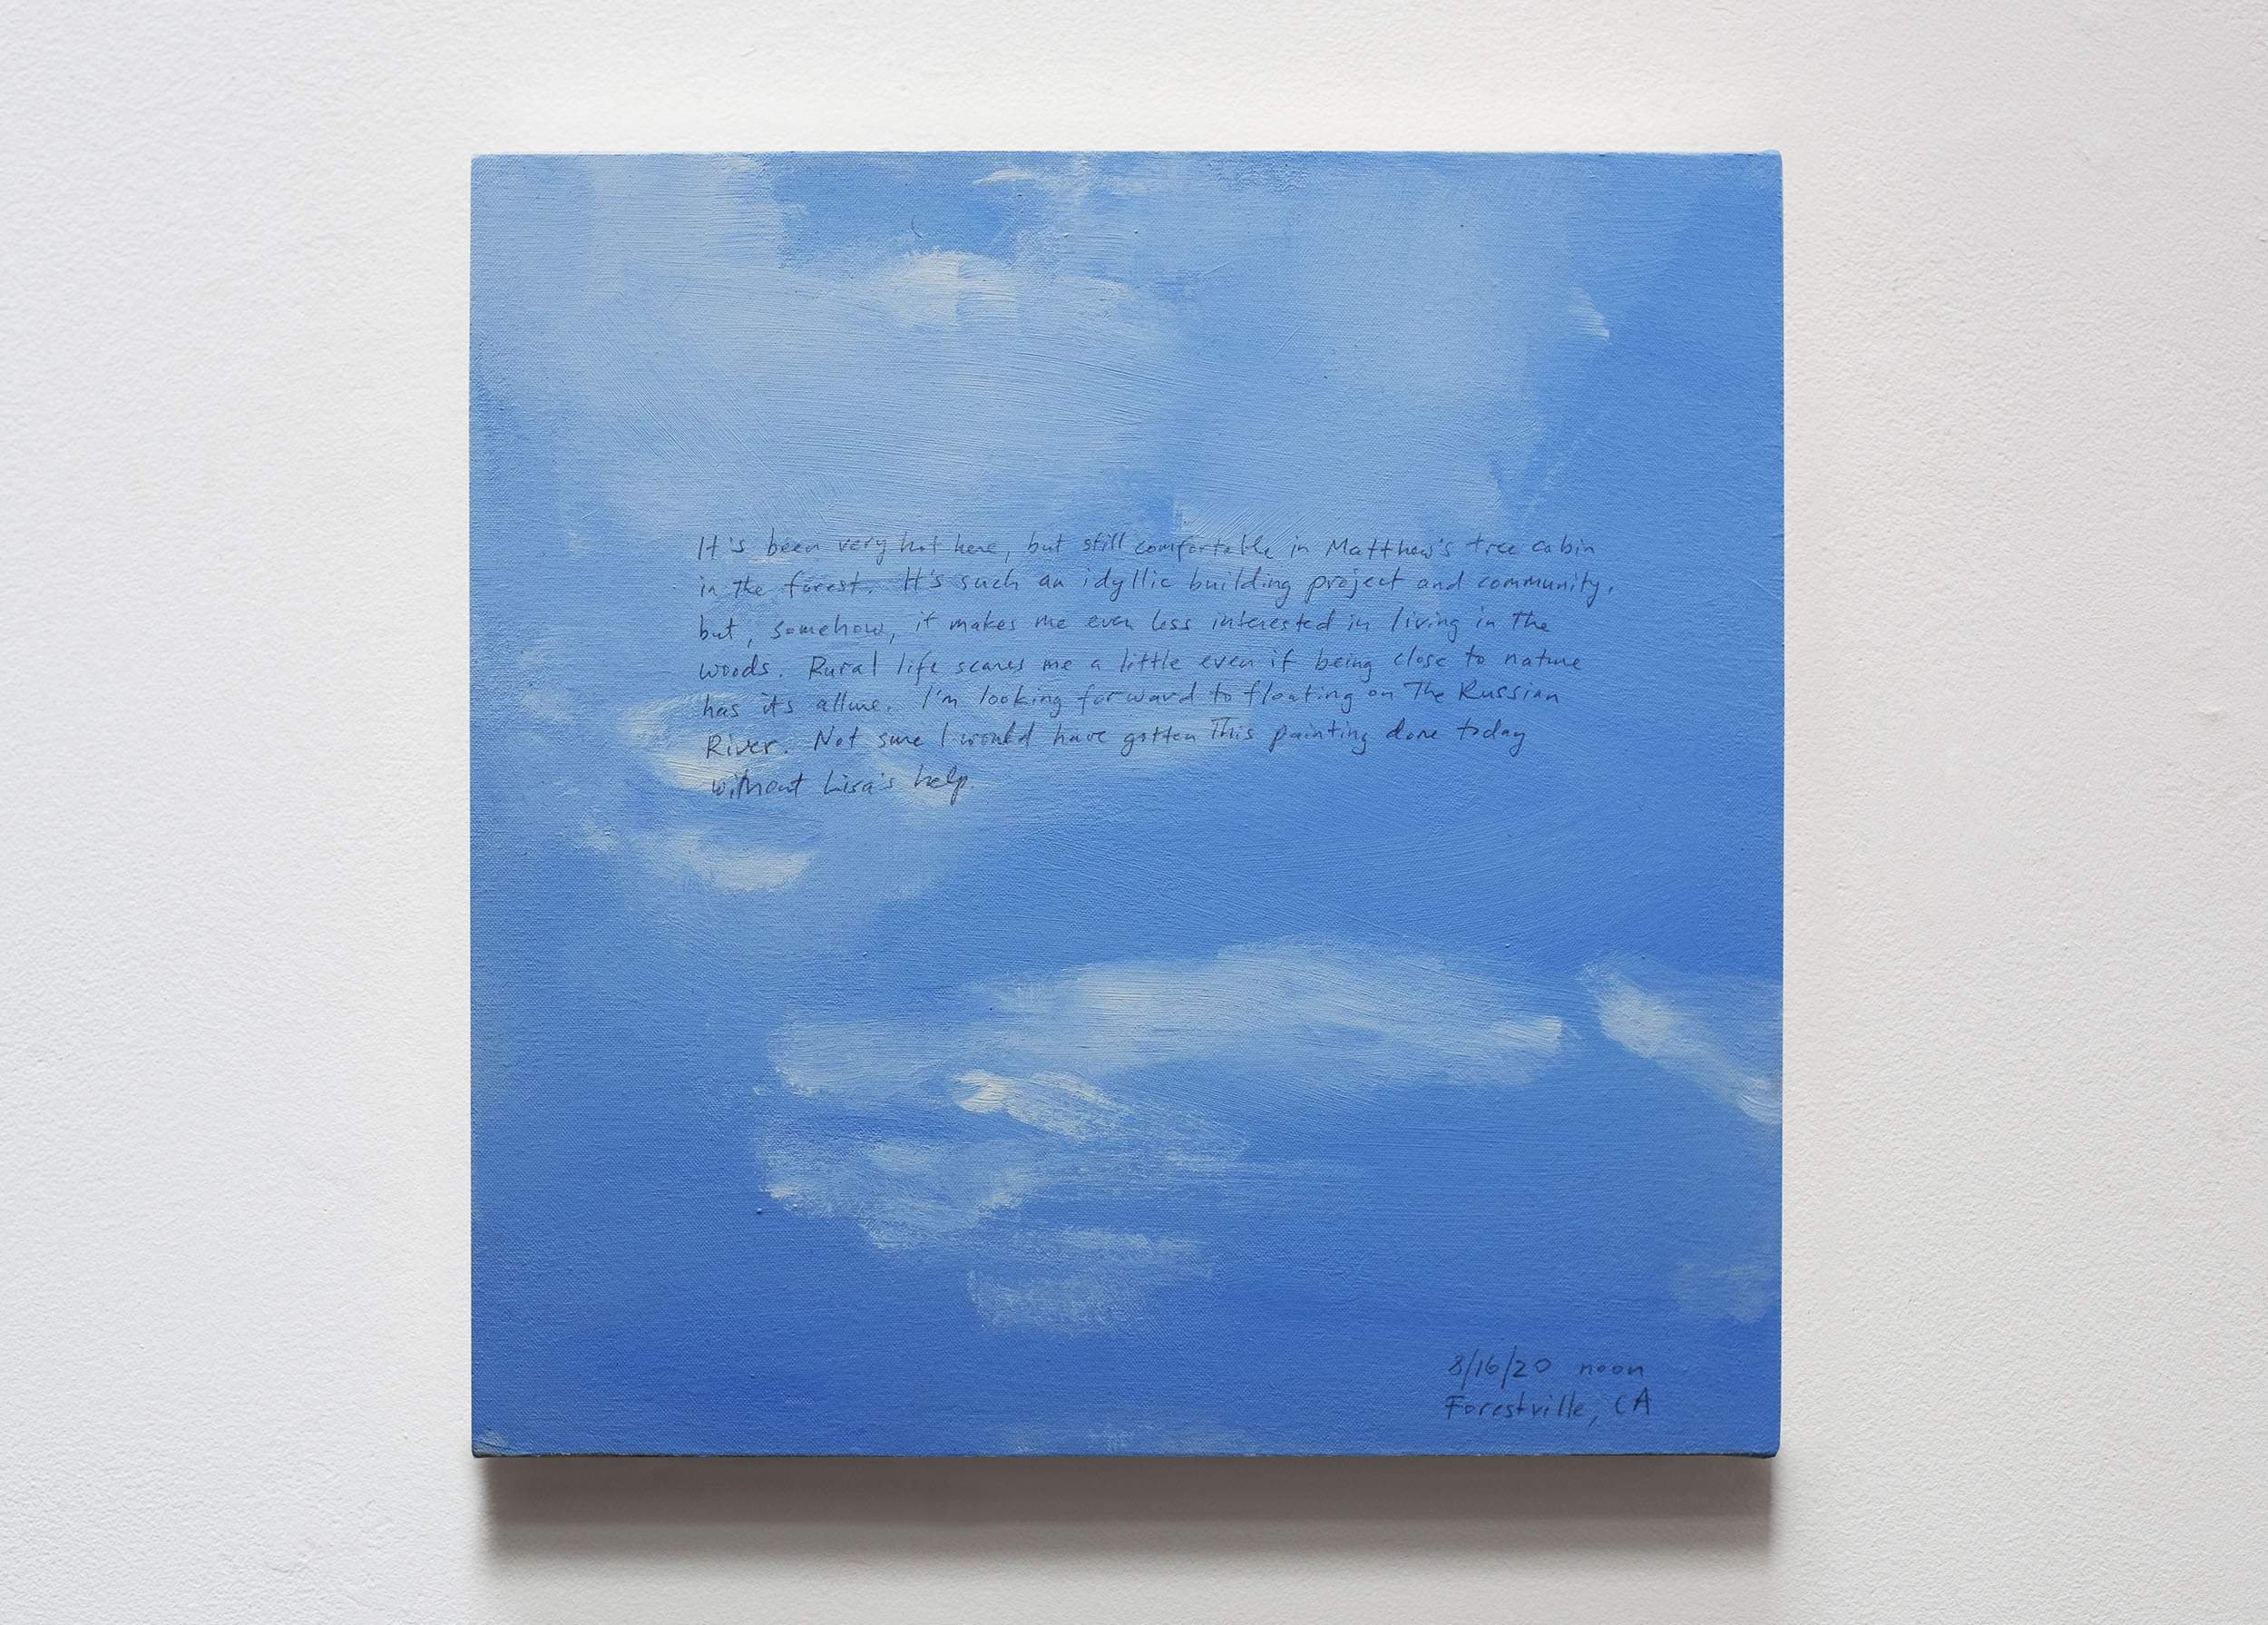 A 14 × 14 inch, acrylic painting of the sky. A journal entry is handwritten on the painting:

“It’s been very hot here, but still comfortable in Matthew’s tree cabin in the forest. It’s such an idyllic building project and community, but, somehow, it makes me even less interested in living in the woods. Rural life scares me a little even if being close to nature has its allure. I’m looking forward to floating on the Russian River. Not sure I would have gotten this painting done today without Lisa’s help.

8/16/20 noon
Forestville, CA”